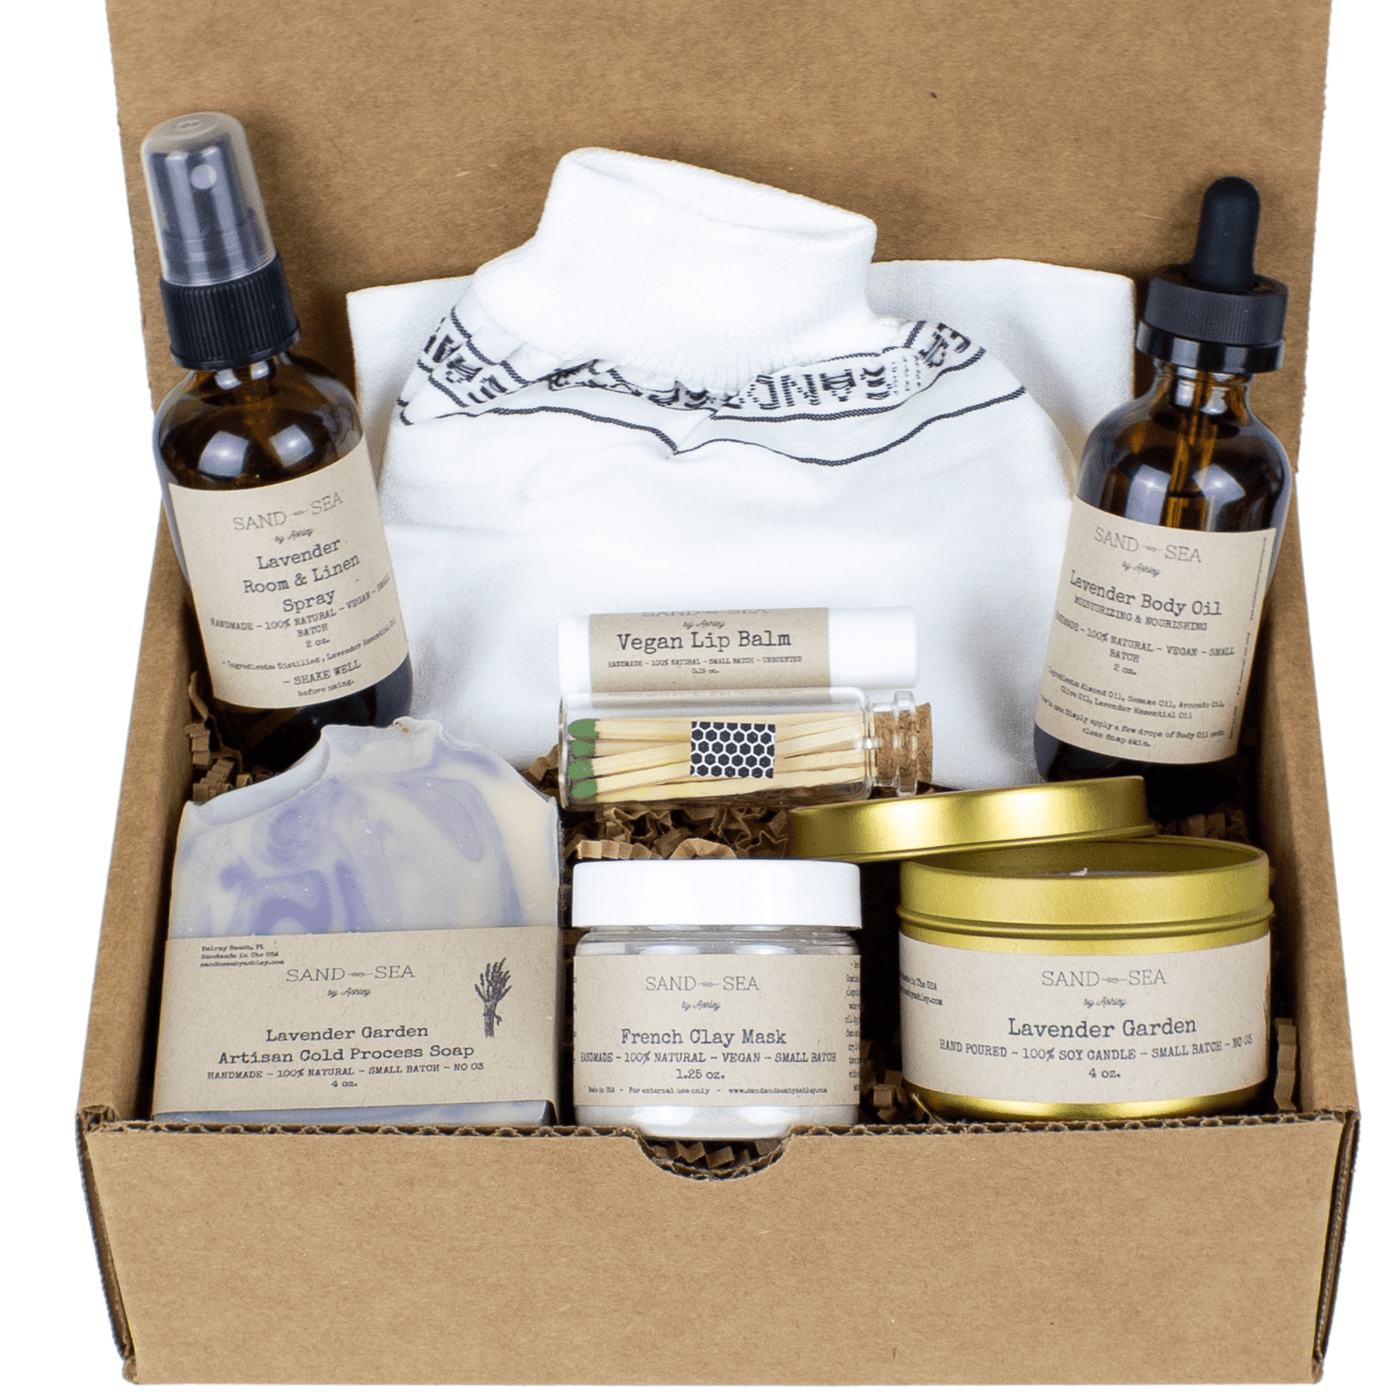 Lavender Spa Gift Set for Her - Room and Linen Spray, Body Oil, Artisan Soap, Candle, Clay Mask, Vegan Lip Balm, Exfoliating Glove - 8 pcs - Sand & Sea by Ashley